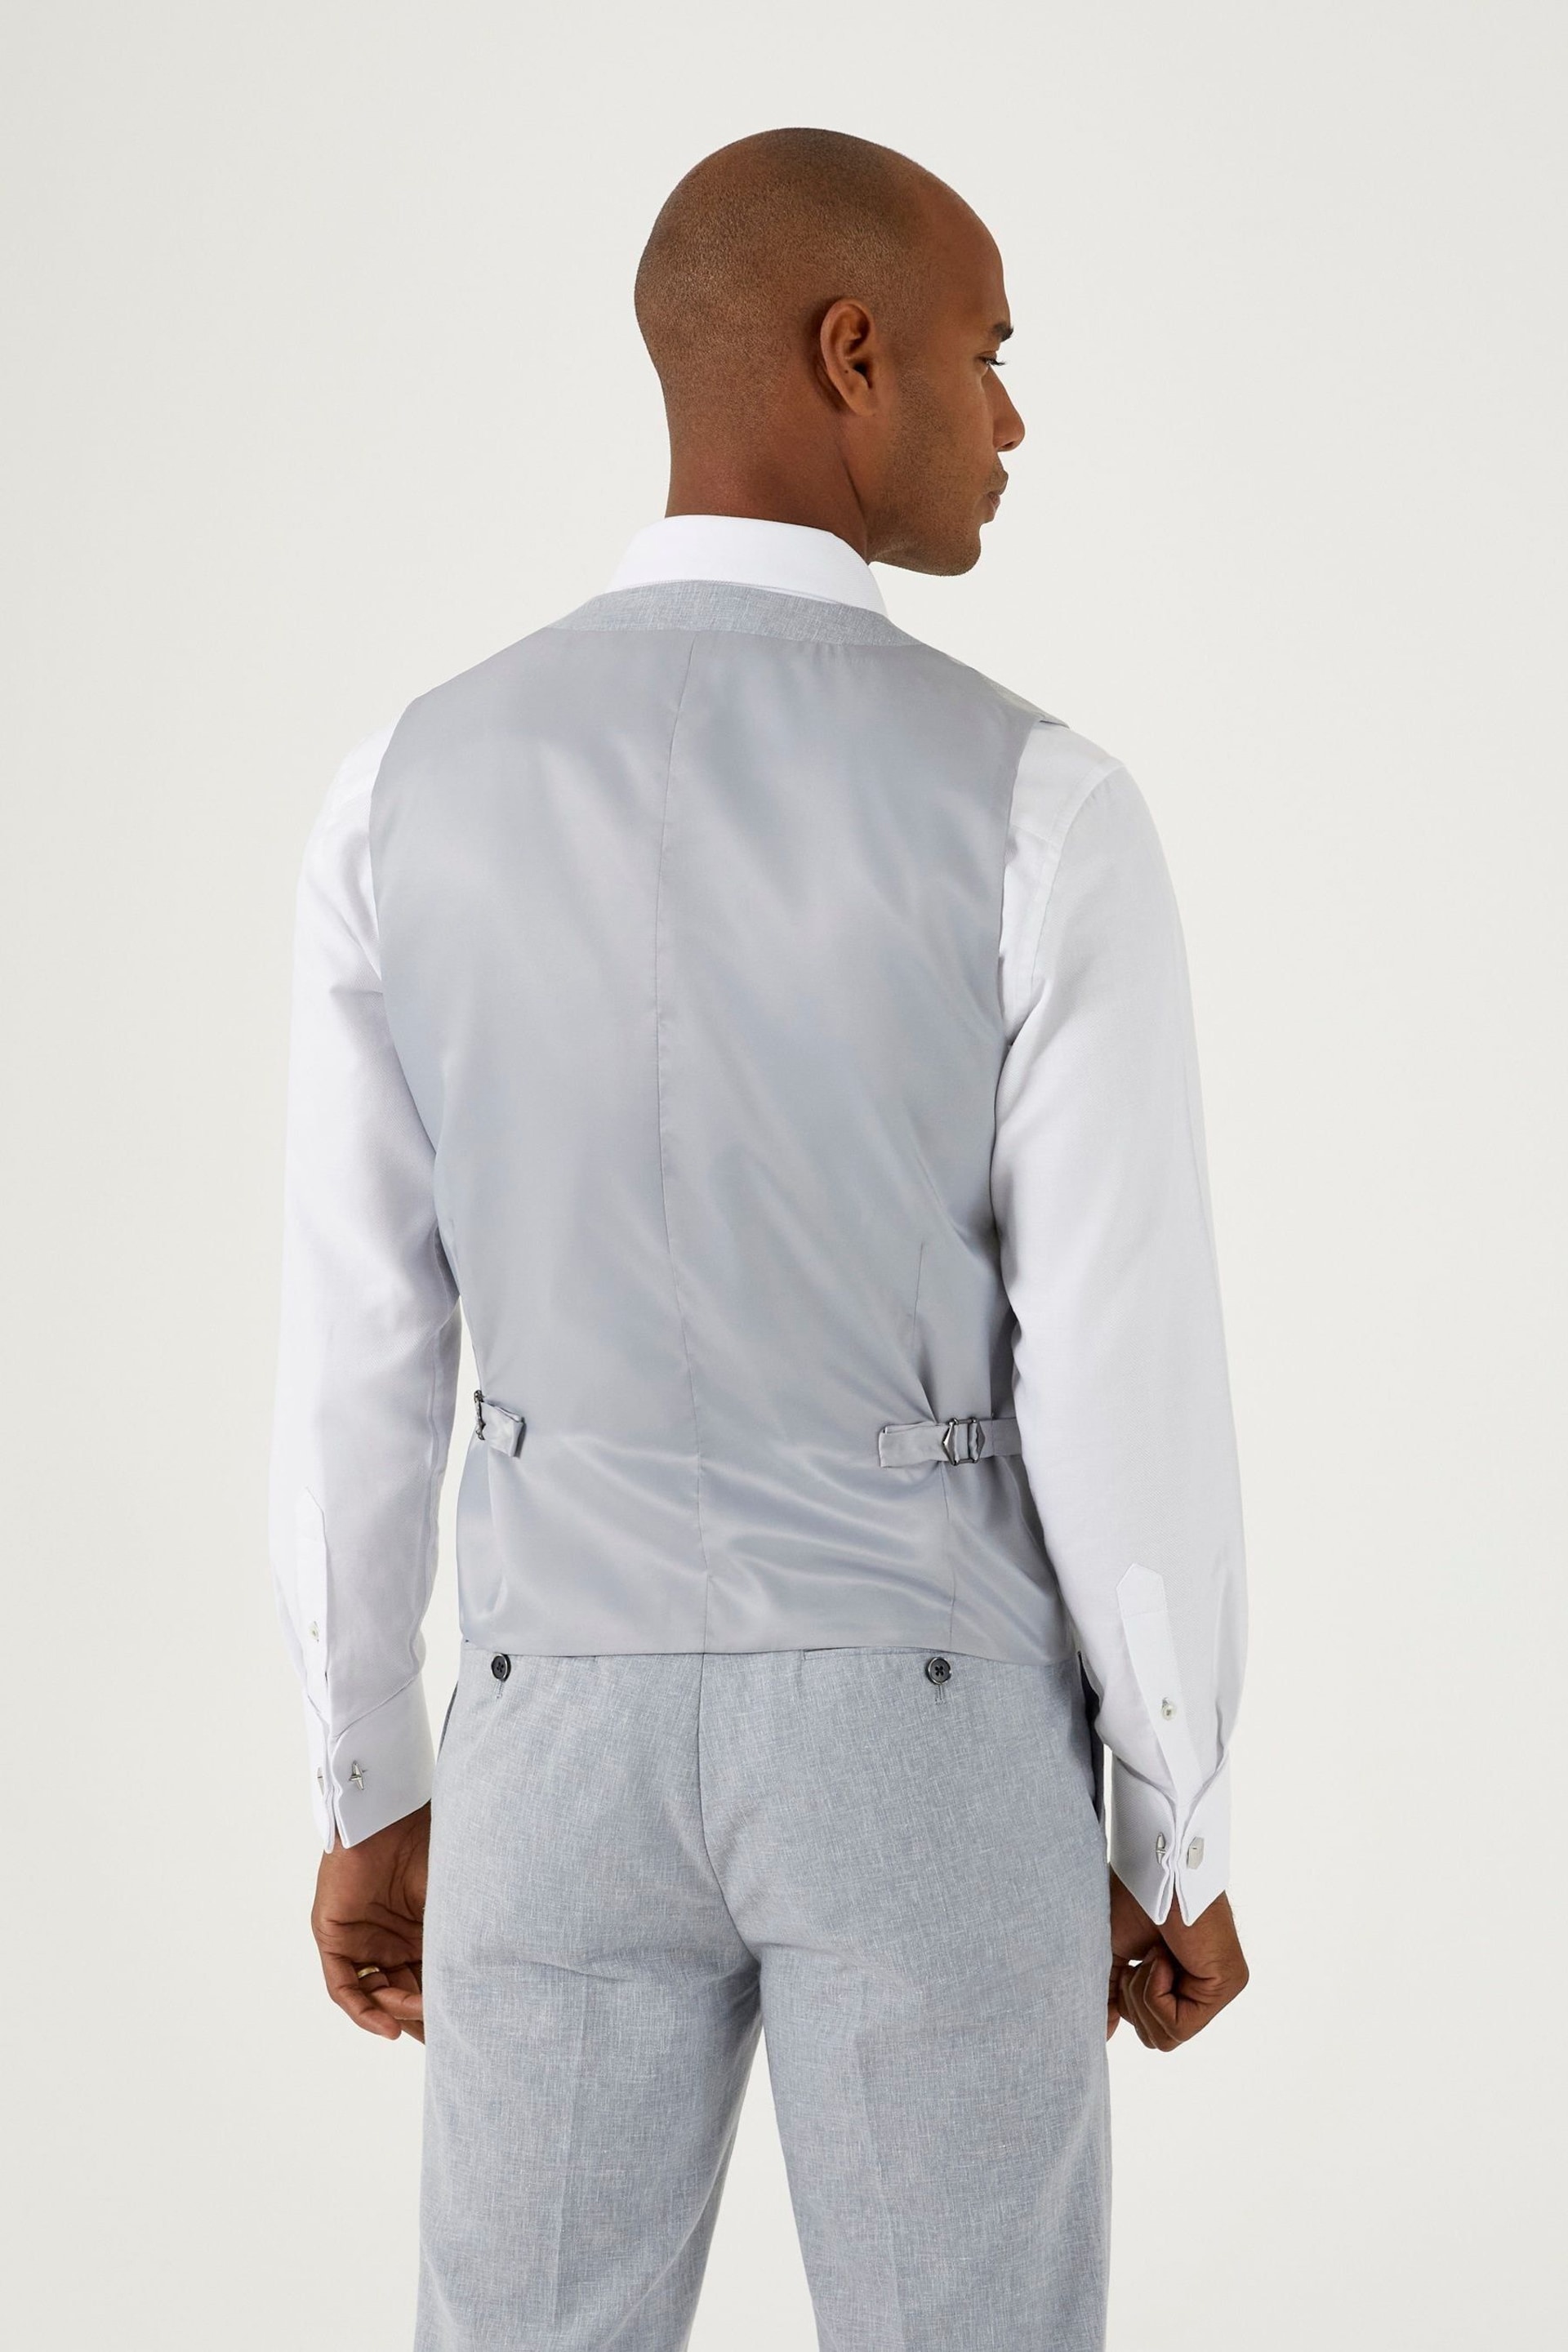 Skopes Silver Tuscany Linen Blend Suit: Waistcoat - Image 3 of 5